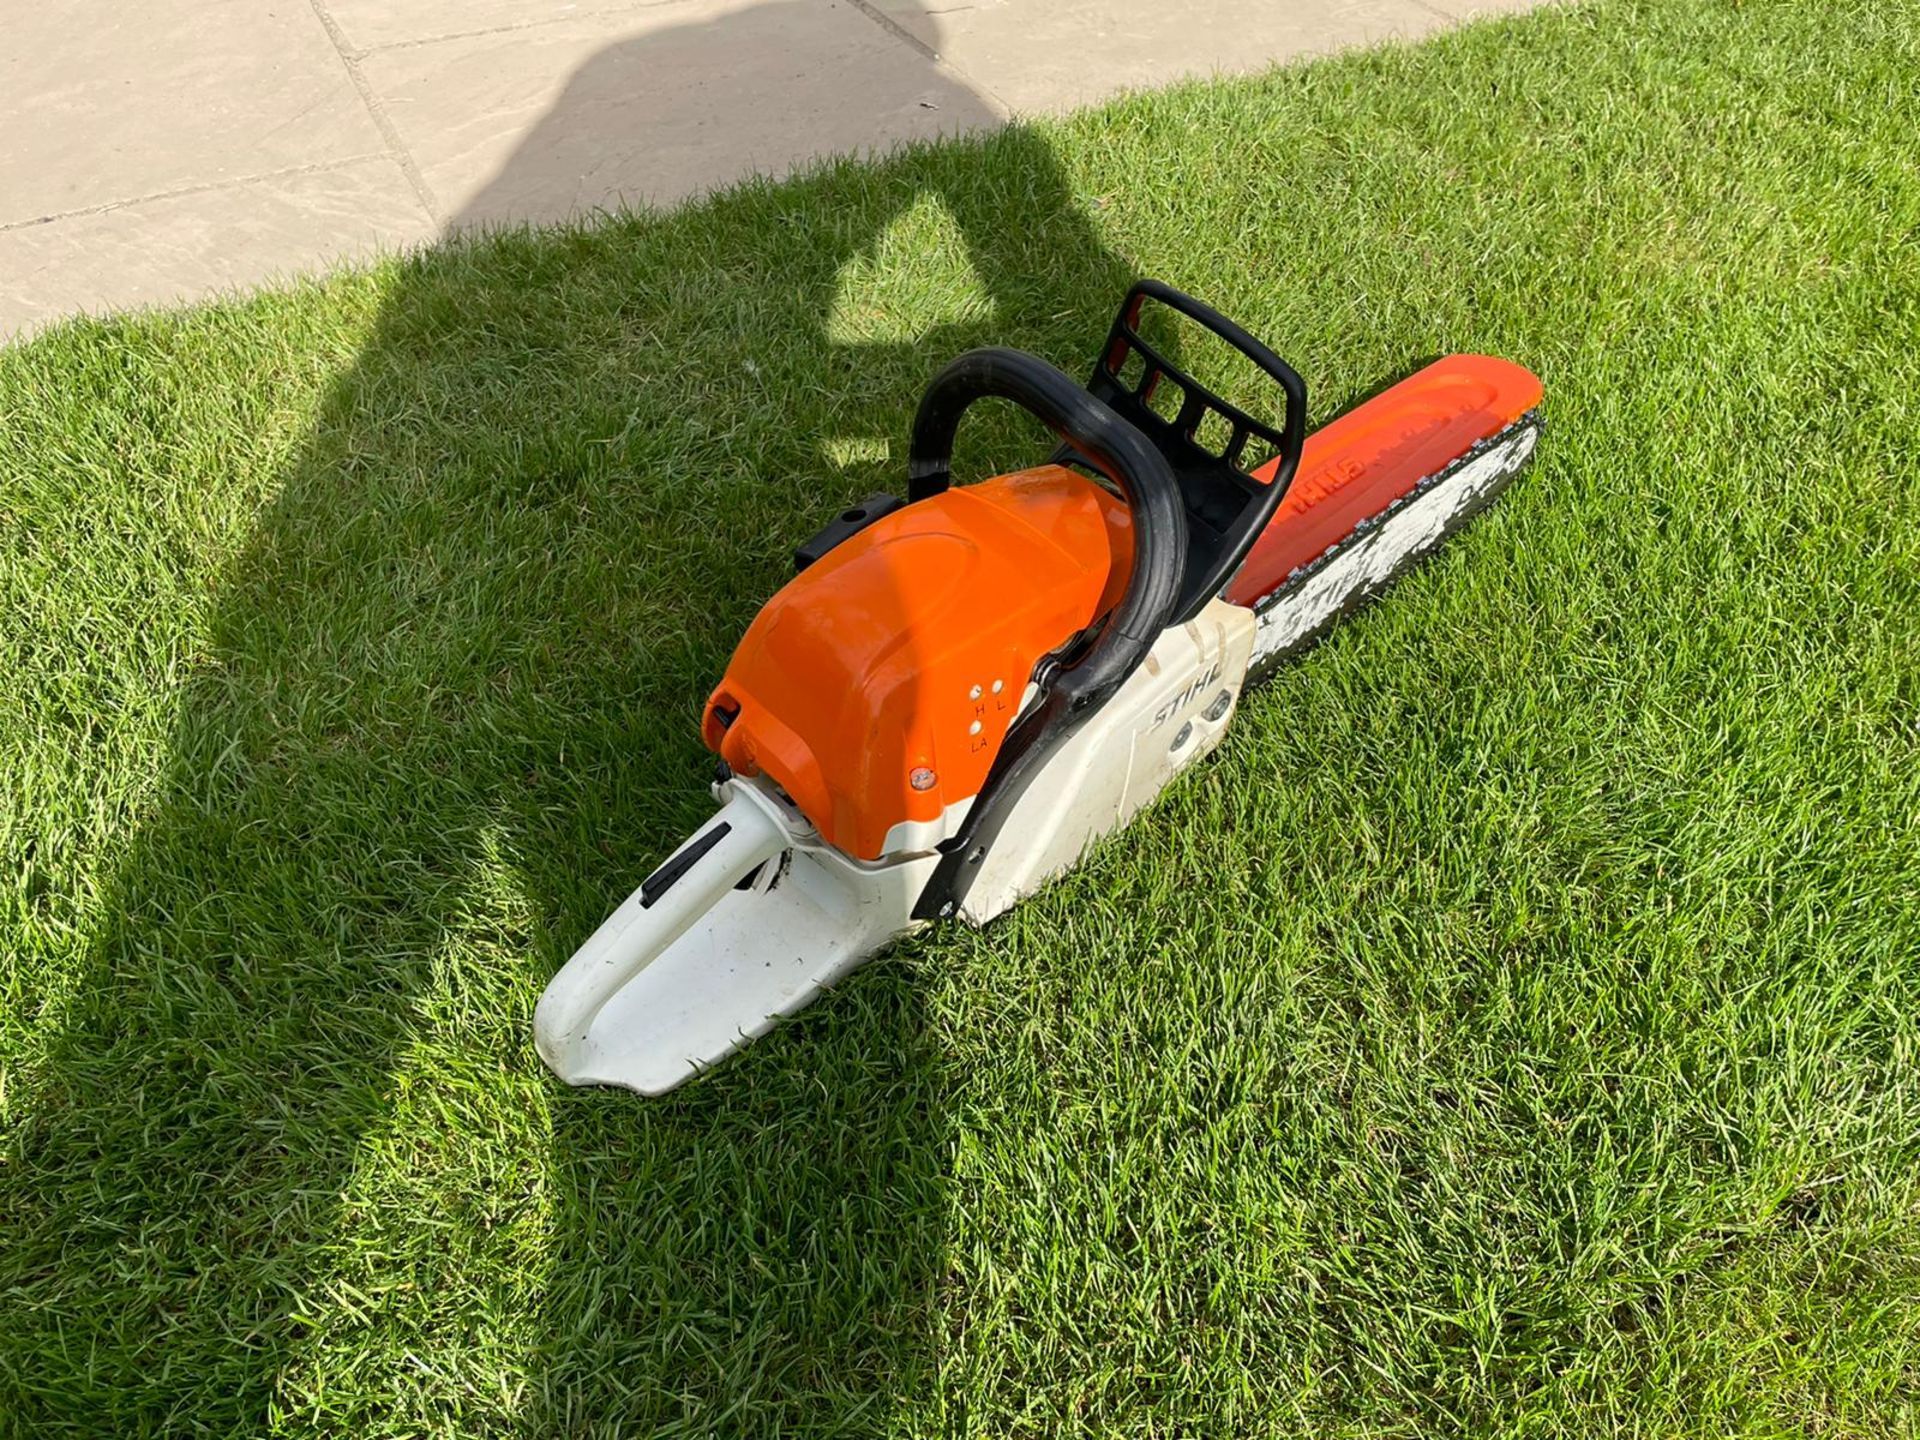 2018 STIHL MS291 CHAINSAW, RUNS AND WORKS, 16" BAR AND CHAIN, BAR COVER IS INCLUDED *NO VAT* - Image 3 of 5